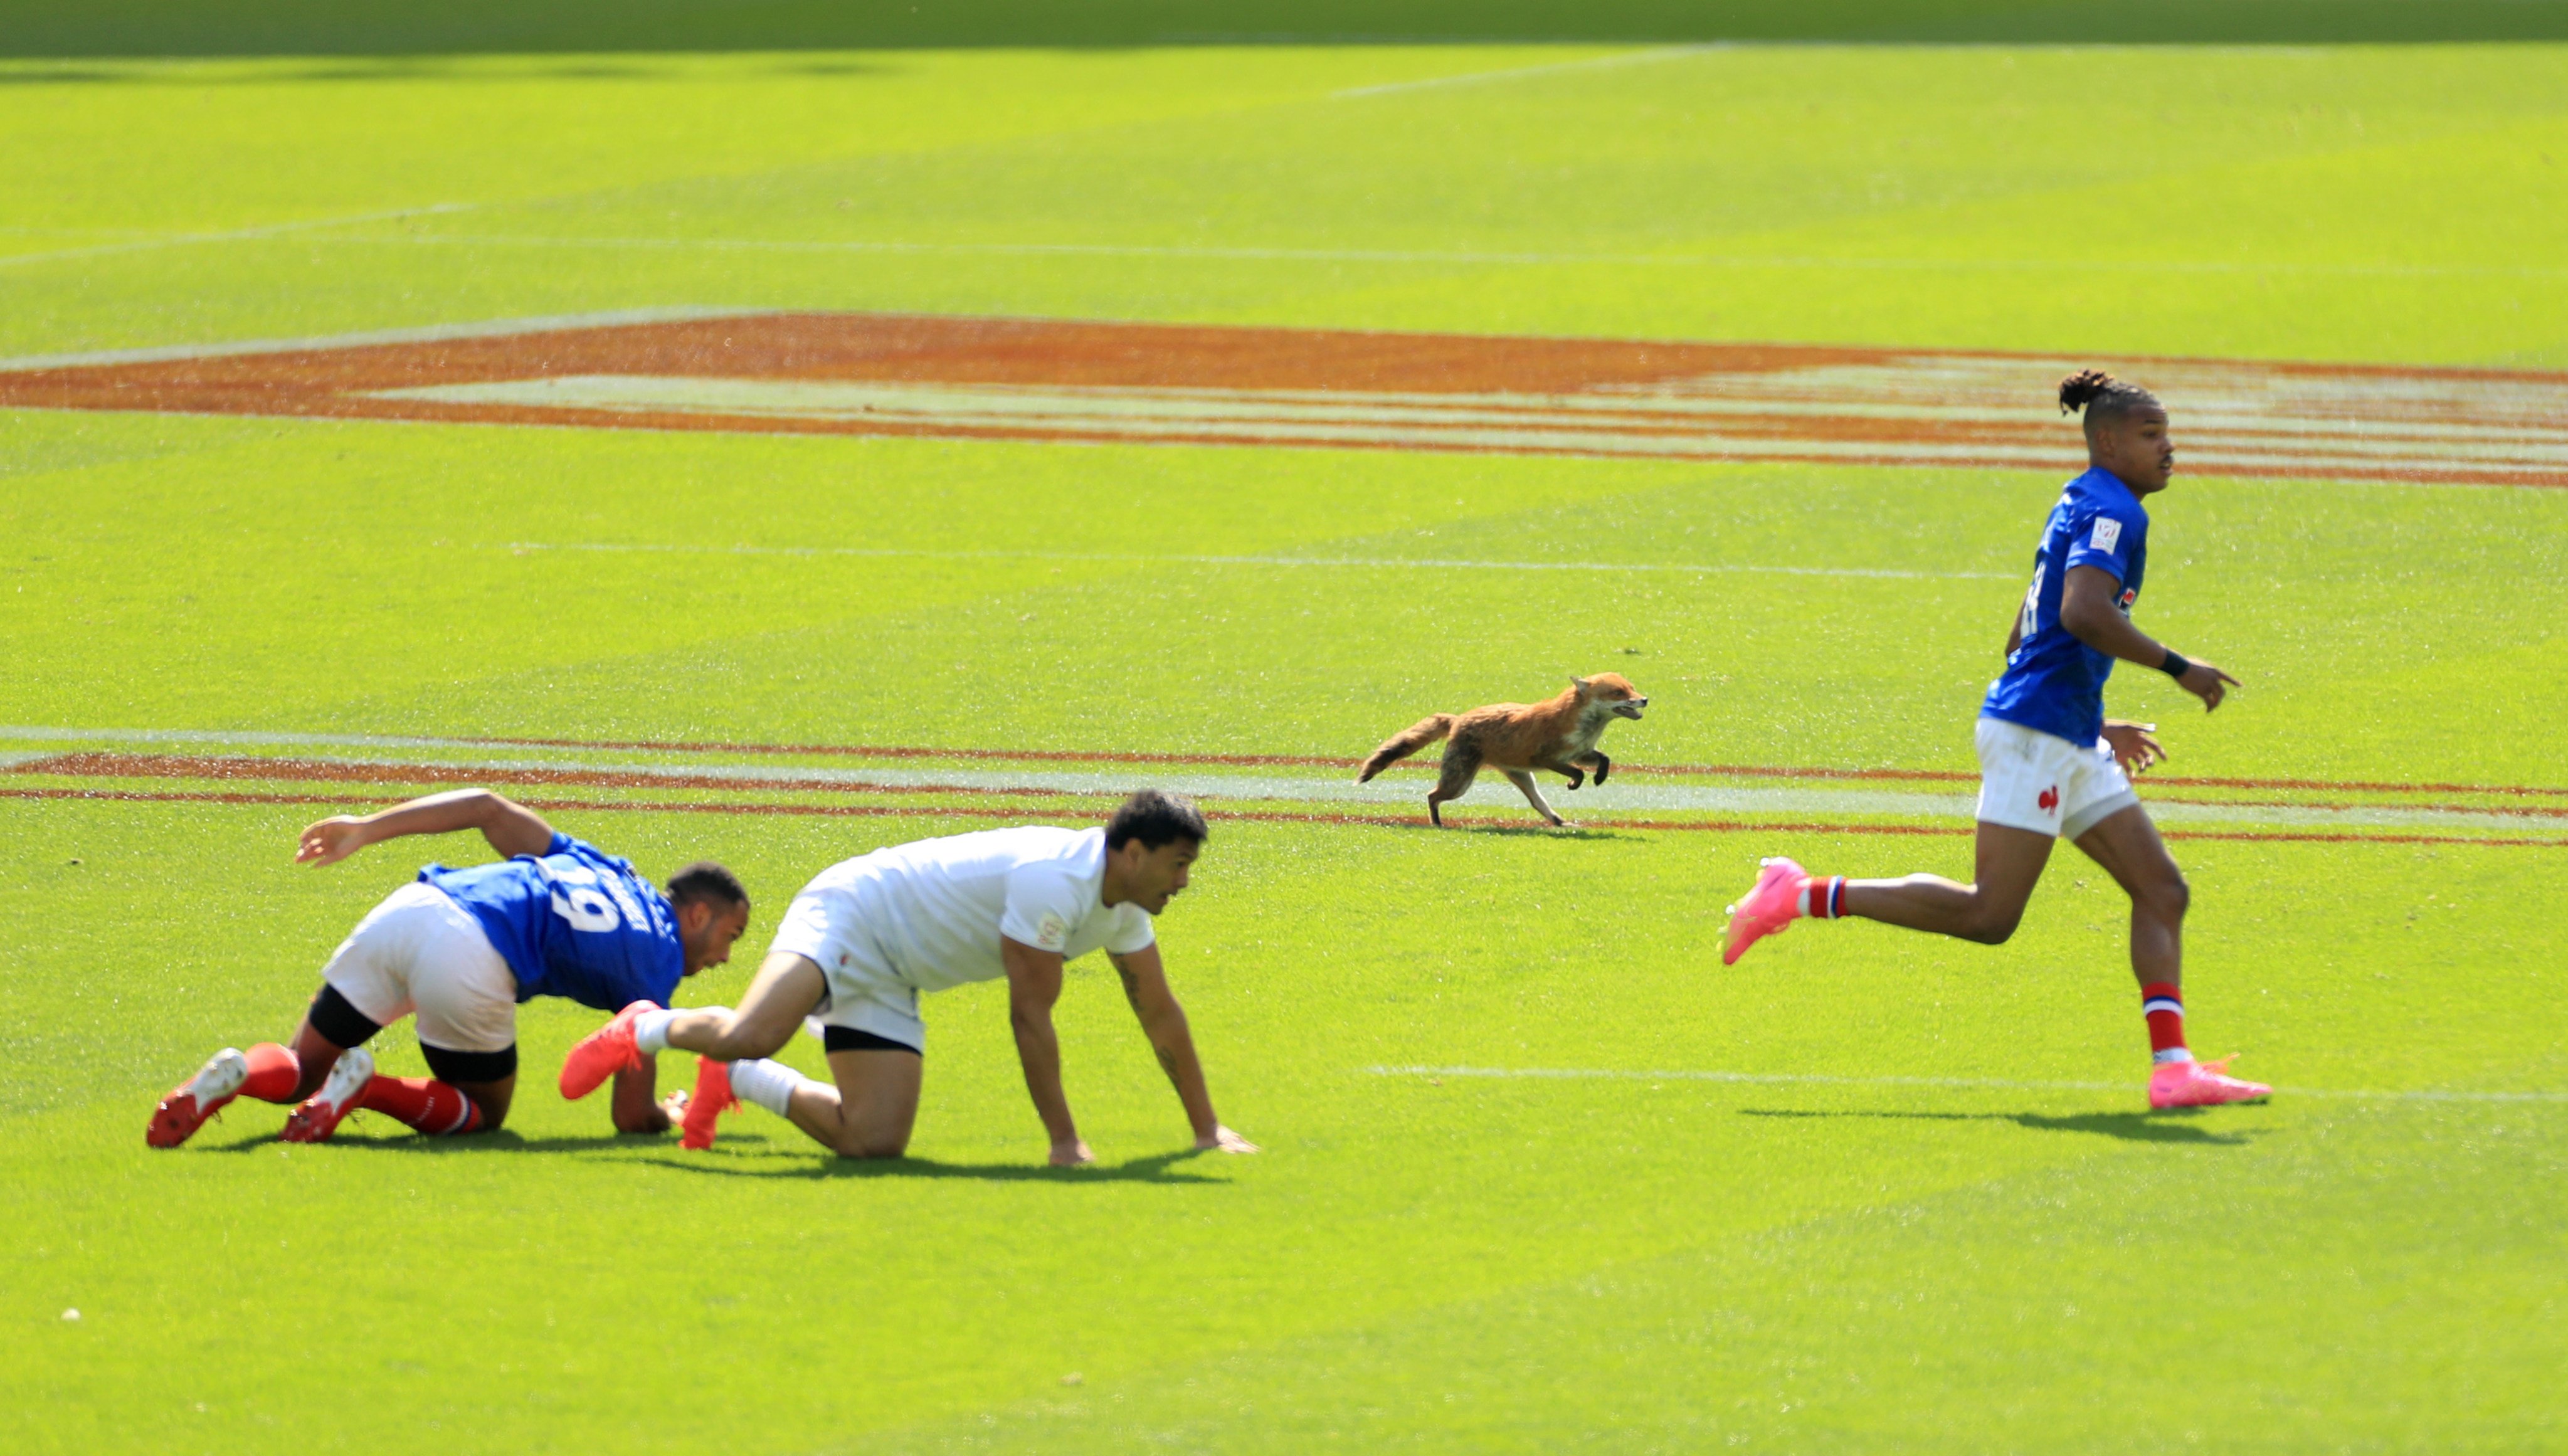 A fox is seen running on the pitch during the HSBC World Rugby Sevens Series at Twickenham Stadium. Photo: dpa